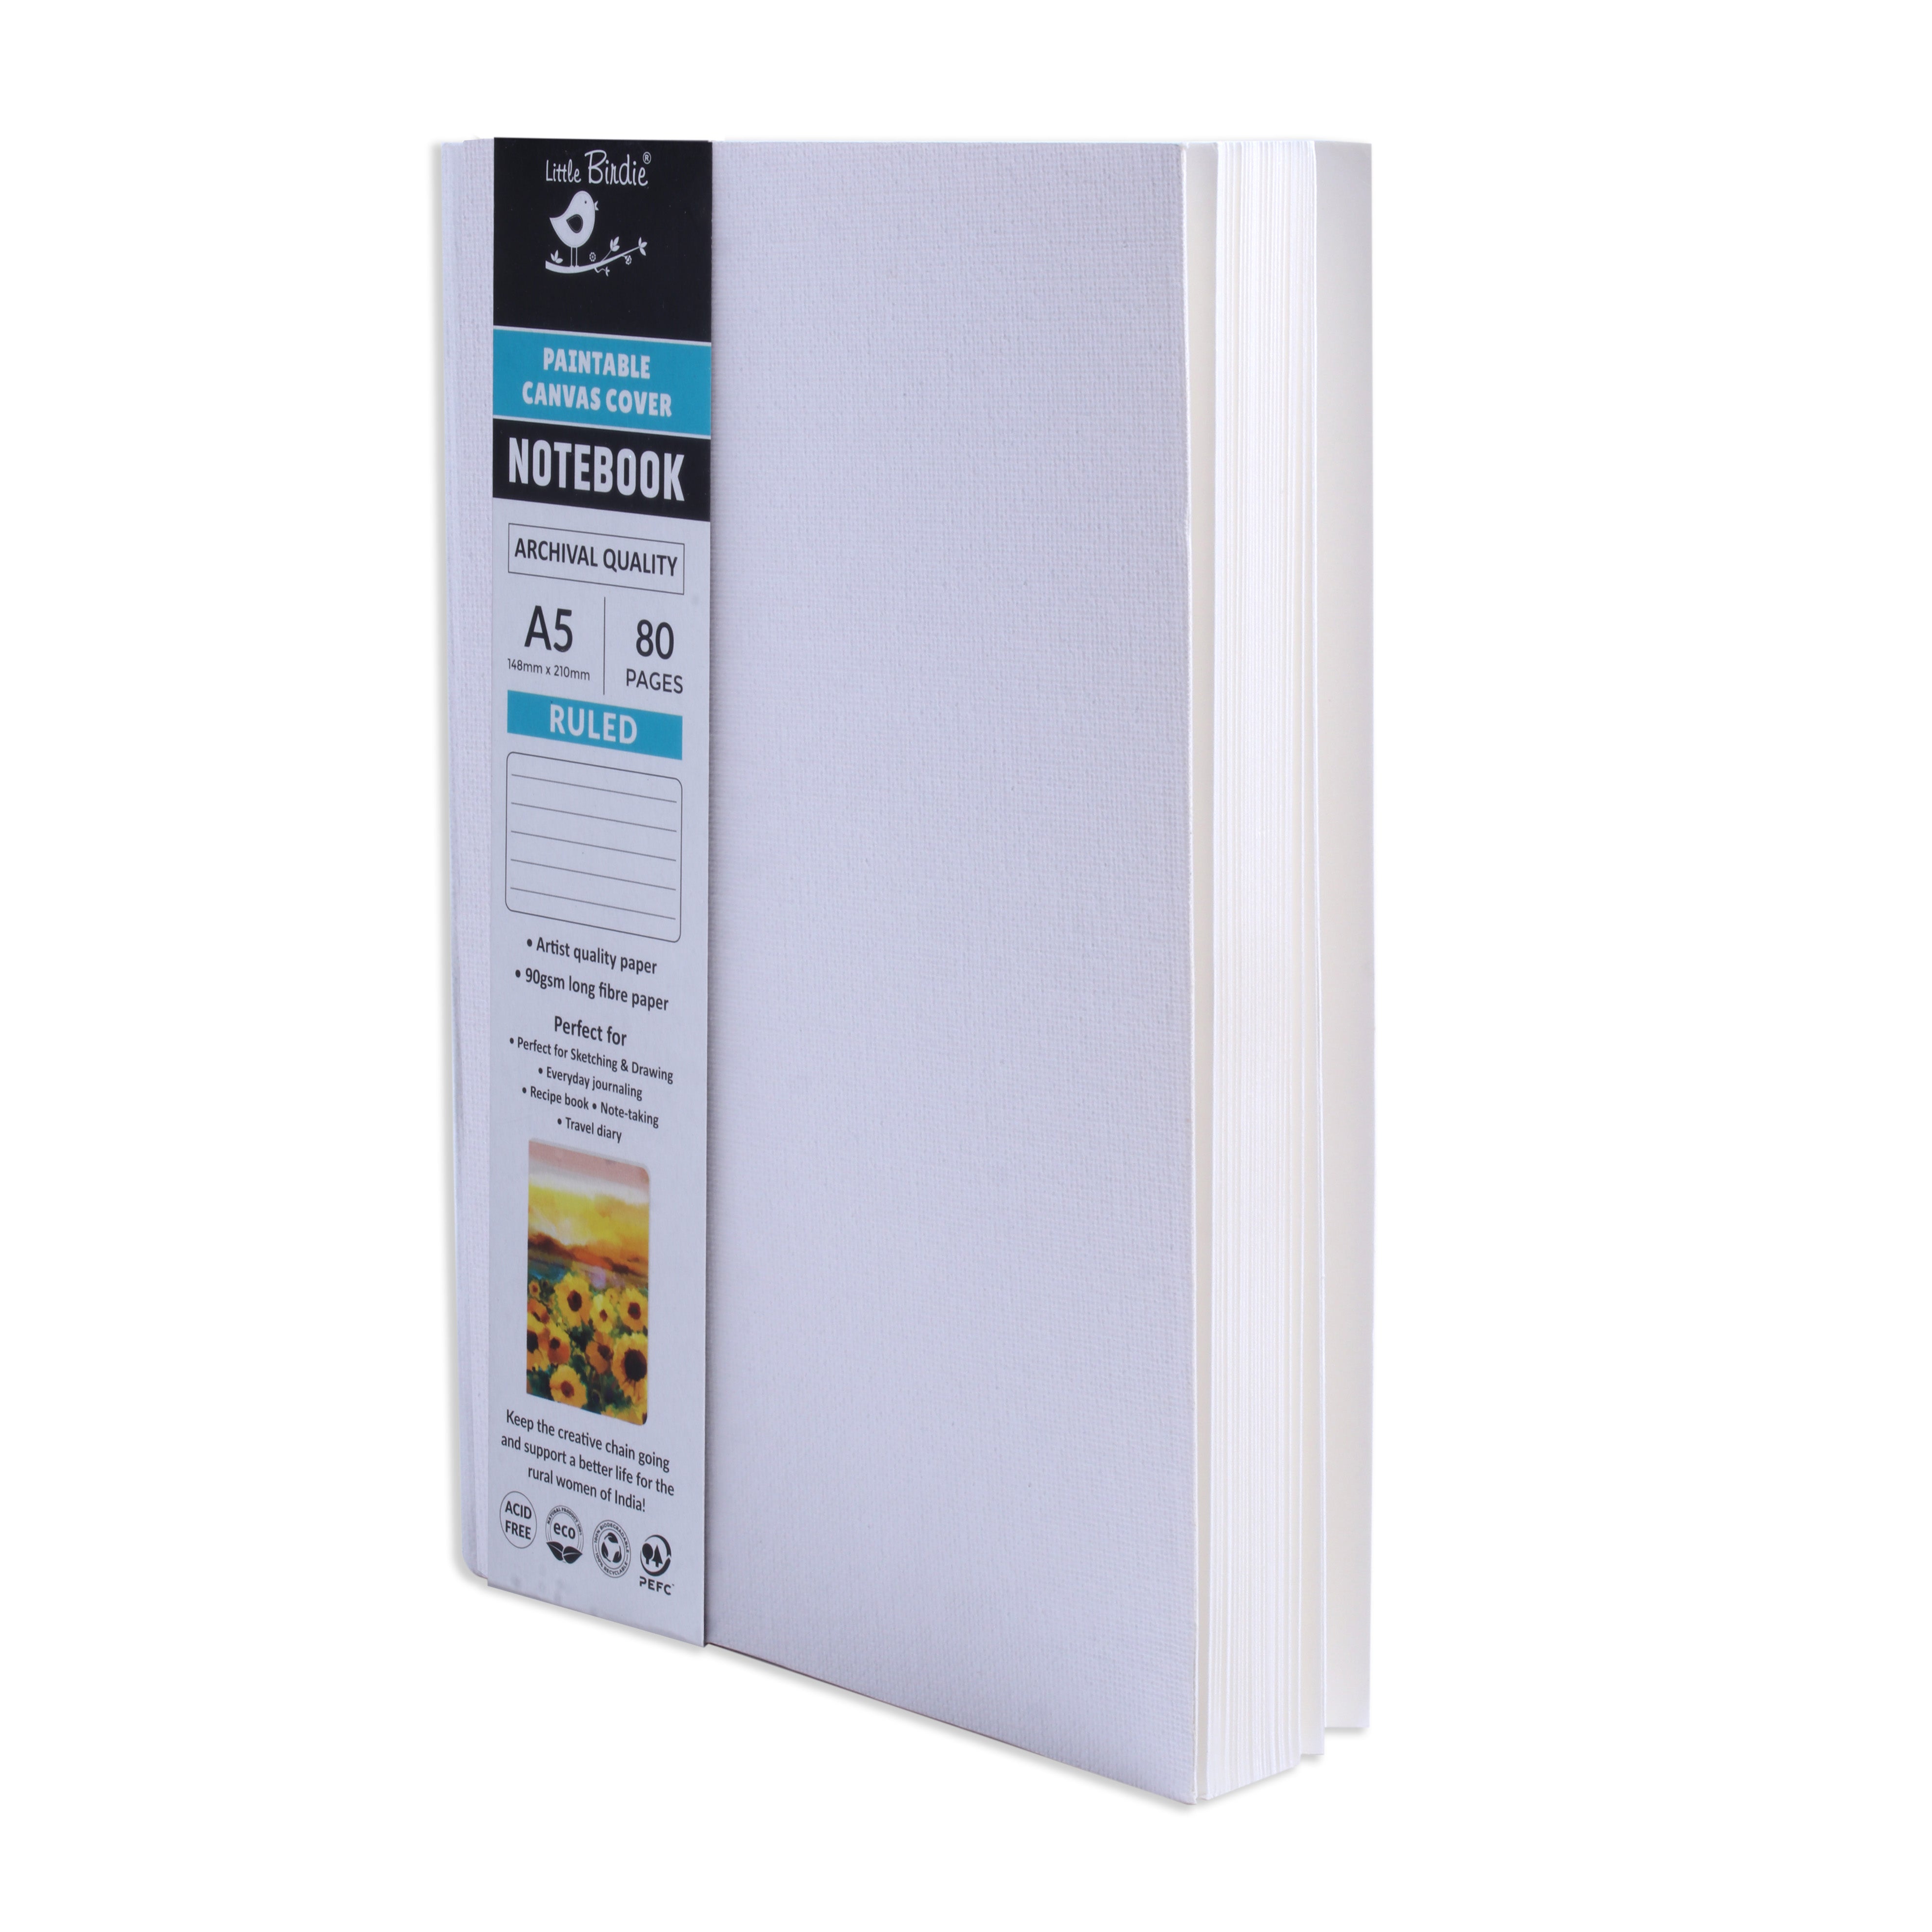 Paintable Canvas Soft Bound Ruled Notebook Portrait A5 90gsm 80 Pages